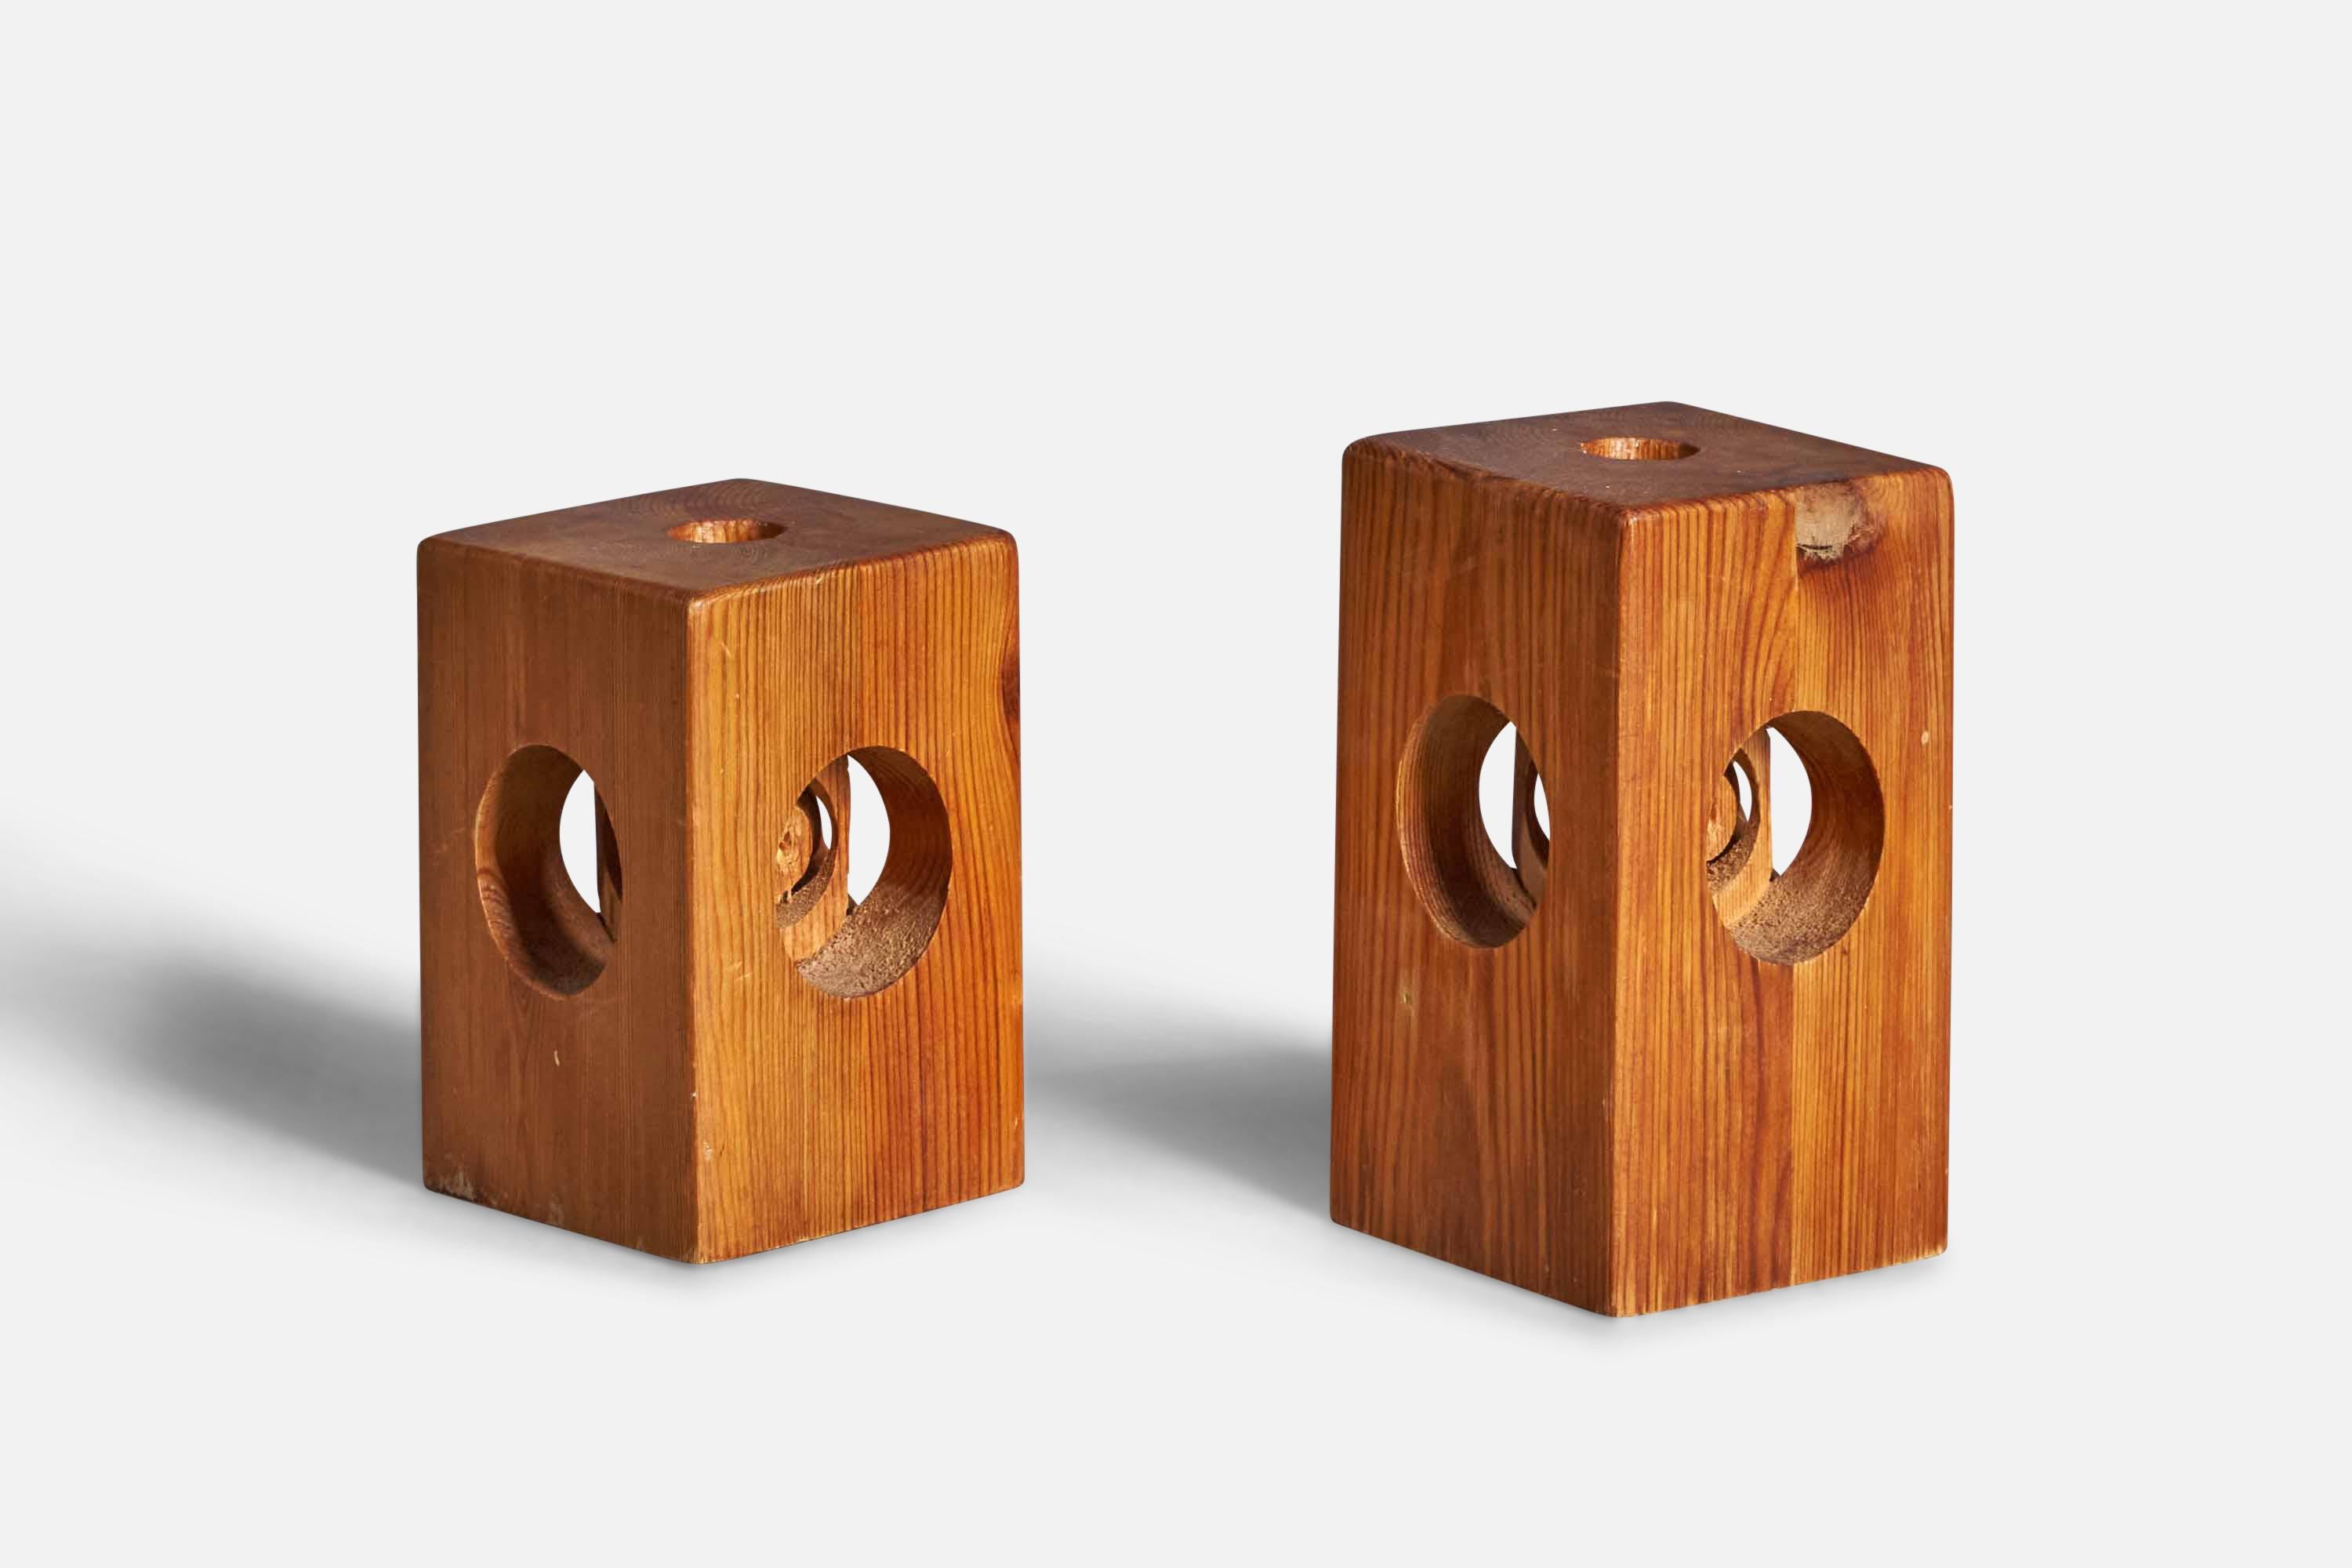 A pair of sculptural pine candle holders designed and produced by Leif Wikner, Sweden, c. 1970s.

Smaller Cube Dimensions (inches): 4.25” H x 3” W x 3” D
Candle Diameter (inches): 0.75”